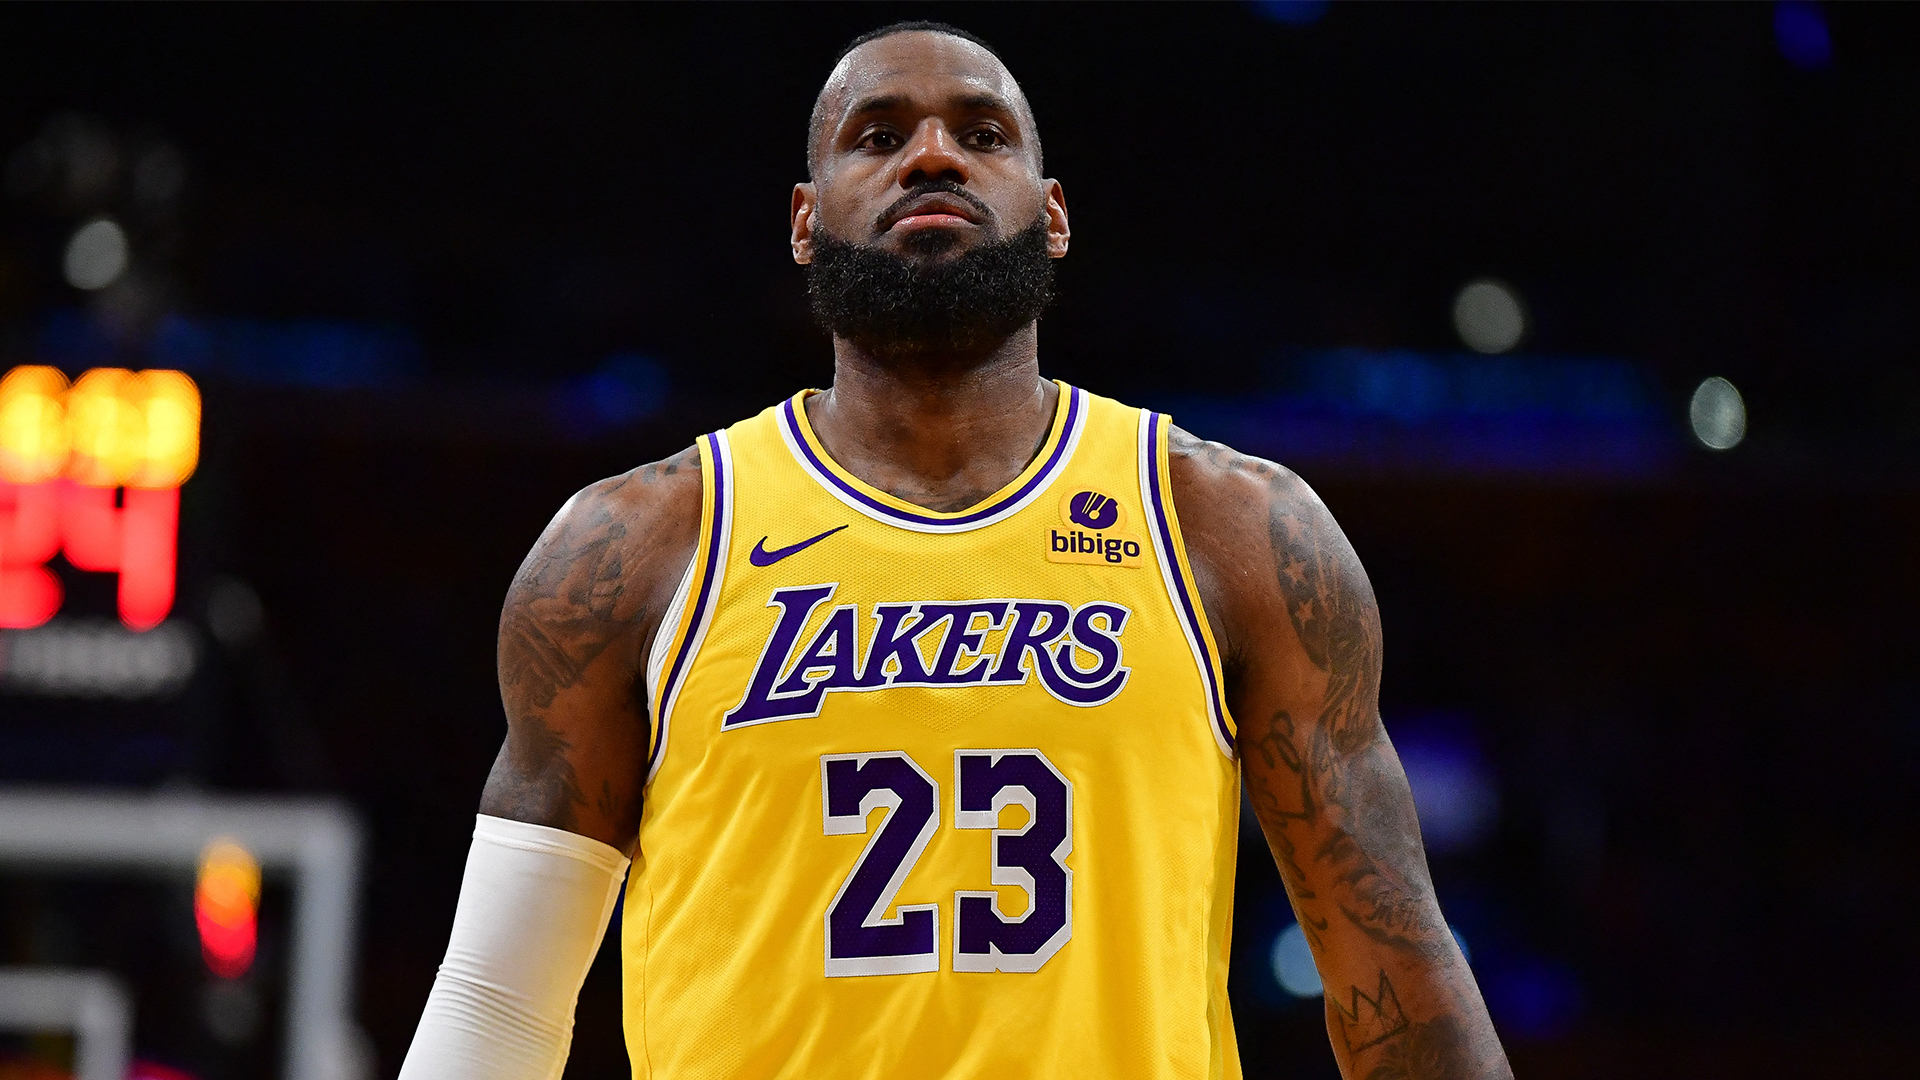 LeBron James in a Lakers Uniform